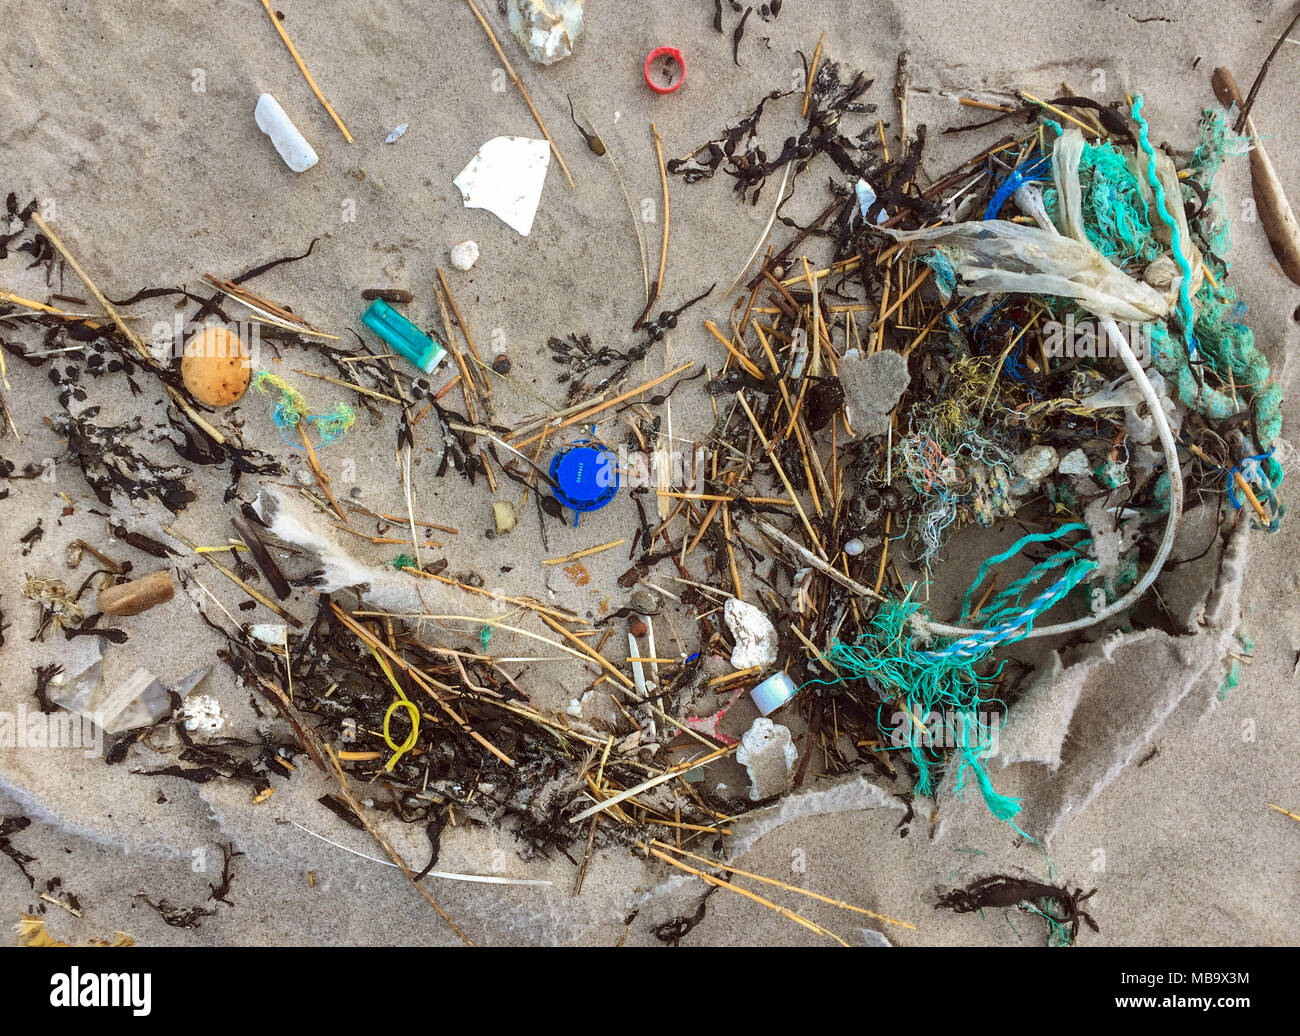 07 February 2018, Denmark, Agger: Washed-up plastic waste on a beach at the North Sea in the Thy national park. Scientists estimate that there are more than 100 million tons of plastic in the oceans. It slowly decomposes into smaller and smaller fragments, which marine organisms consume with food. In the ocean, plastic lasts a very long time, often several centuries. A plastic bottle takes 450 years to completely decompose. | usage worldwide Stock Photo